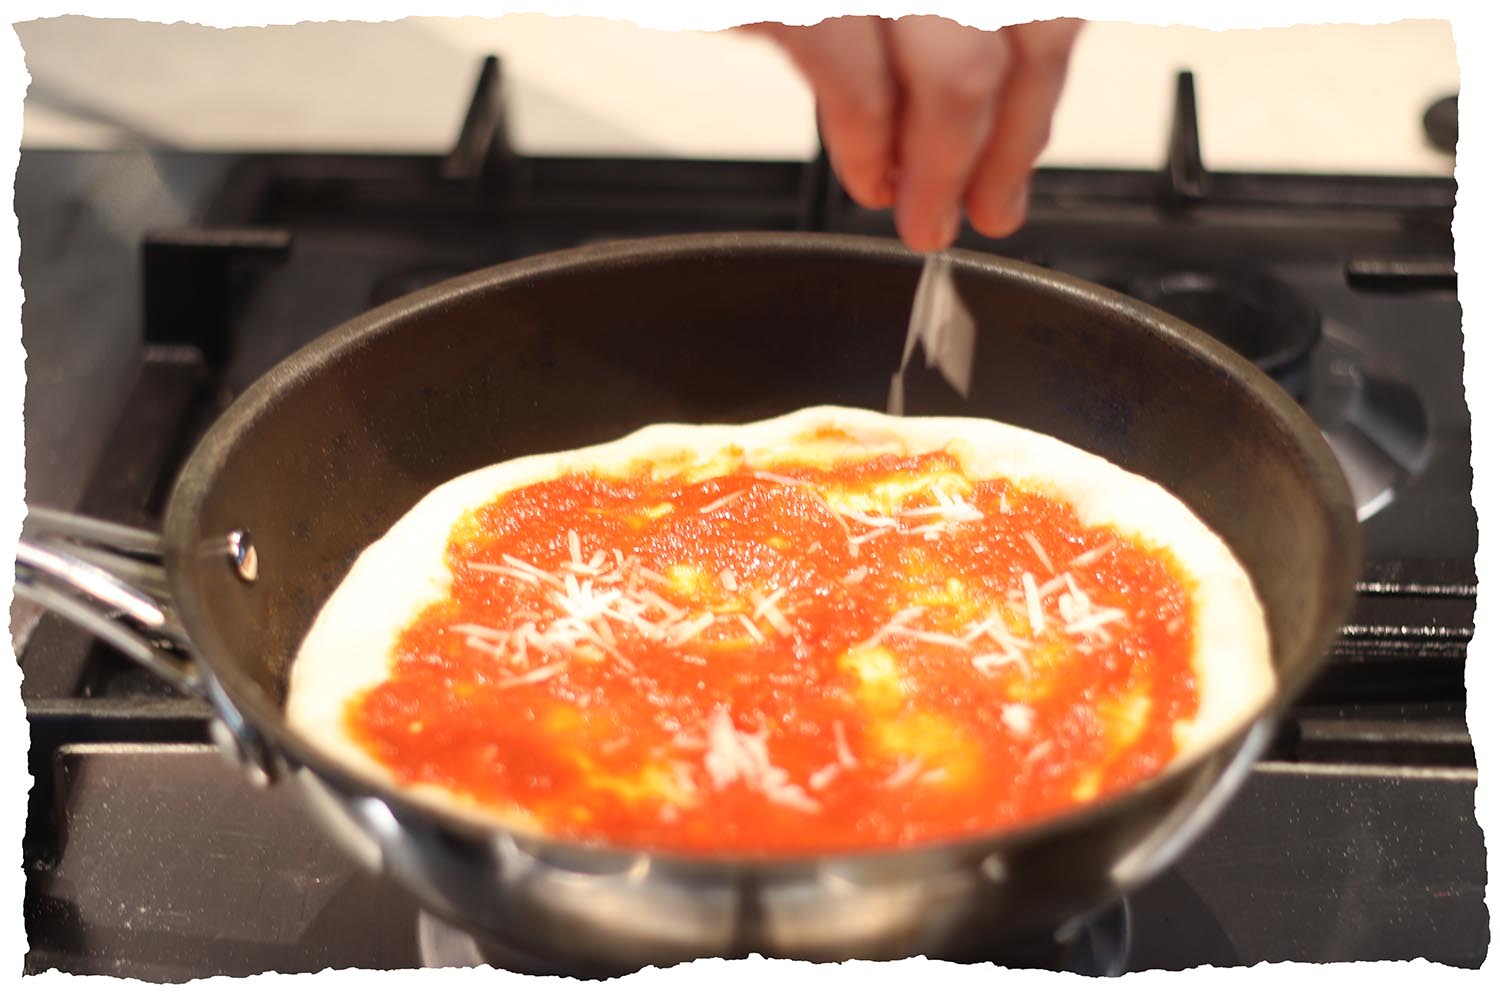 Add parmesan to your pizza